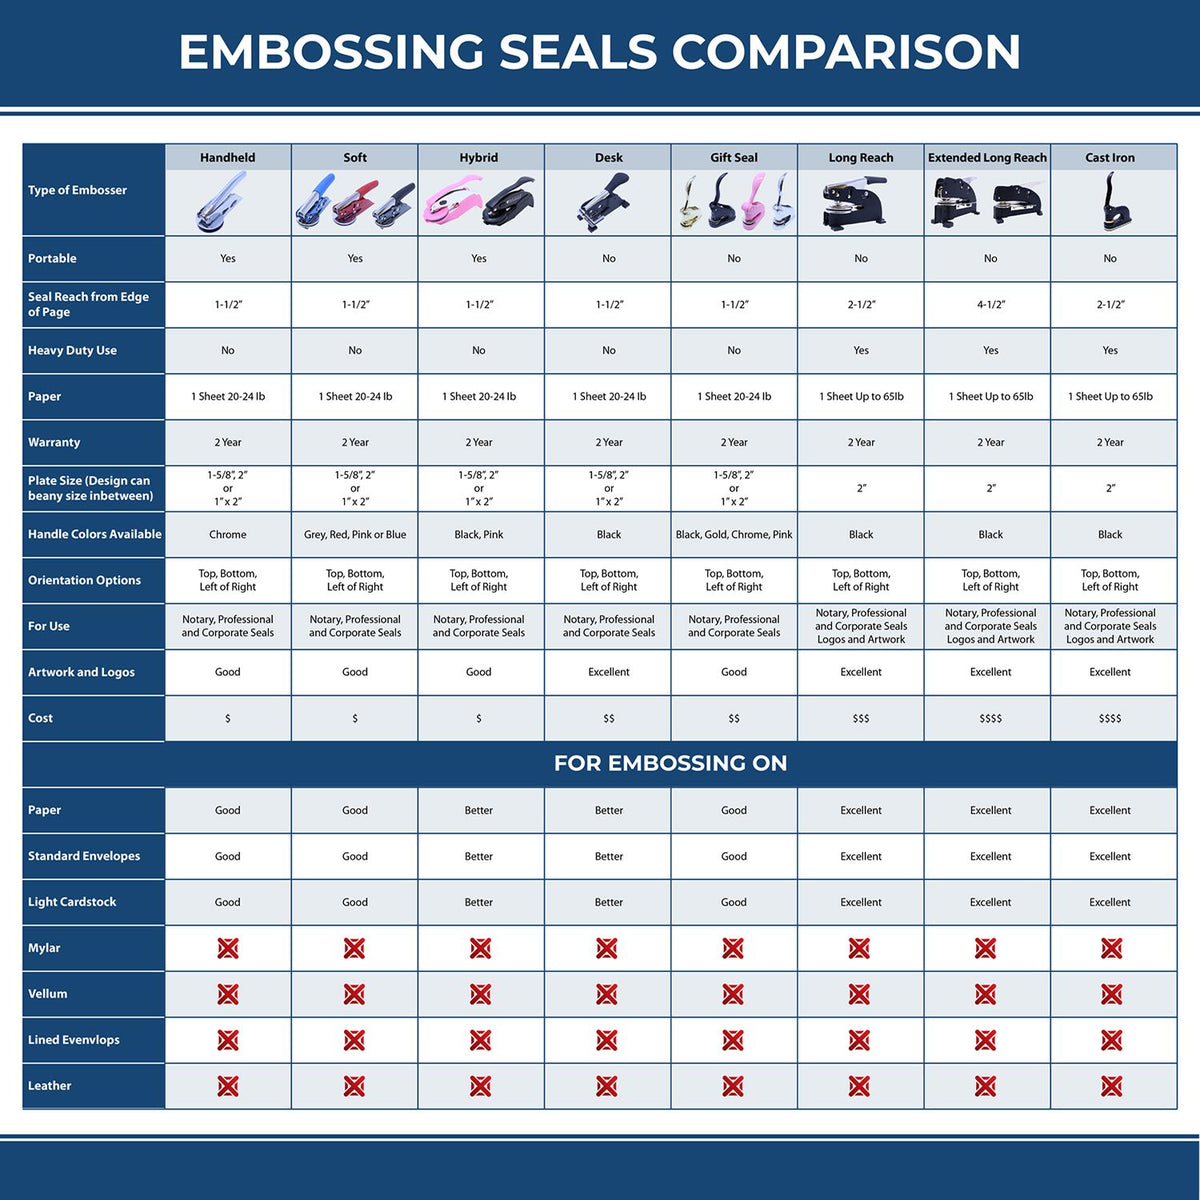 A comparison chart for the different types of mount models available for the Heavy Duty Cast Iron Minnesota Architect Embosser.